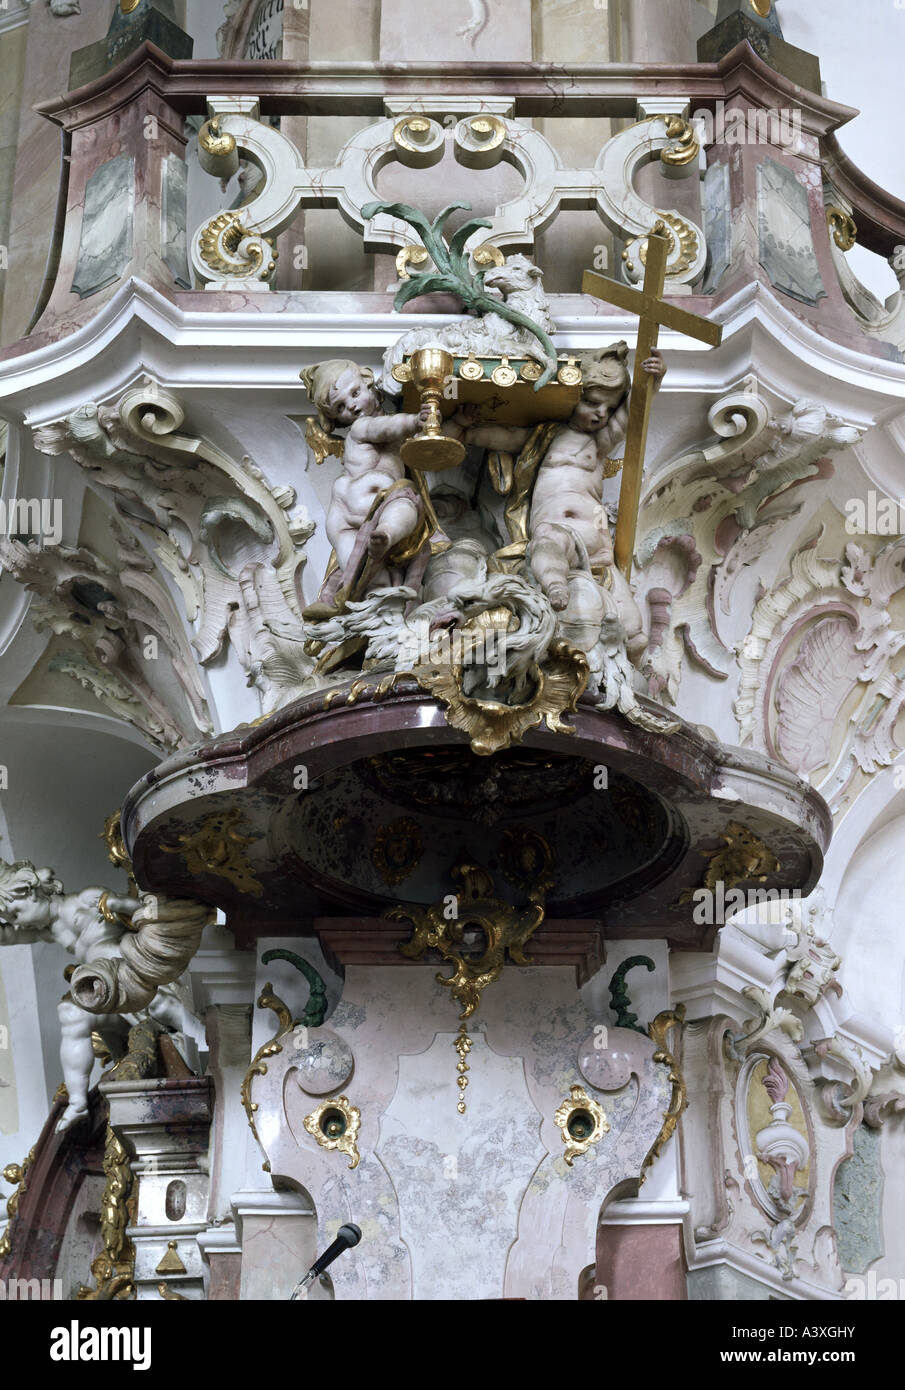 fine arts, angels, angels with chalice and cross over ceiling of pulpit, sculpture, by Josef Anton Feuchtmayer (1696 - 1770), Bi Stock Photo